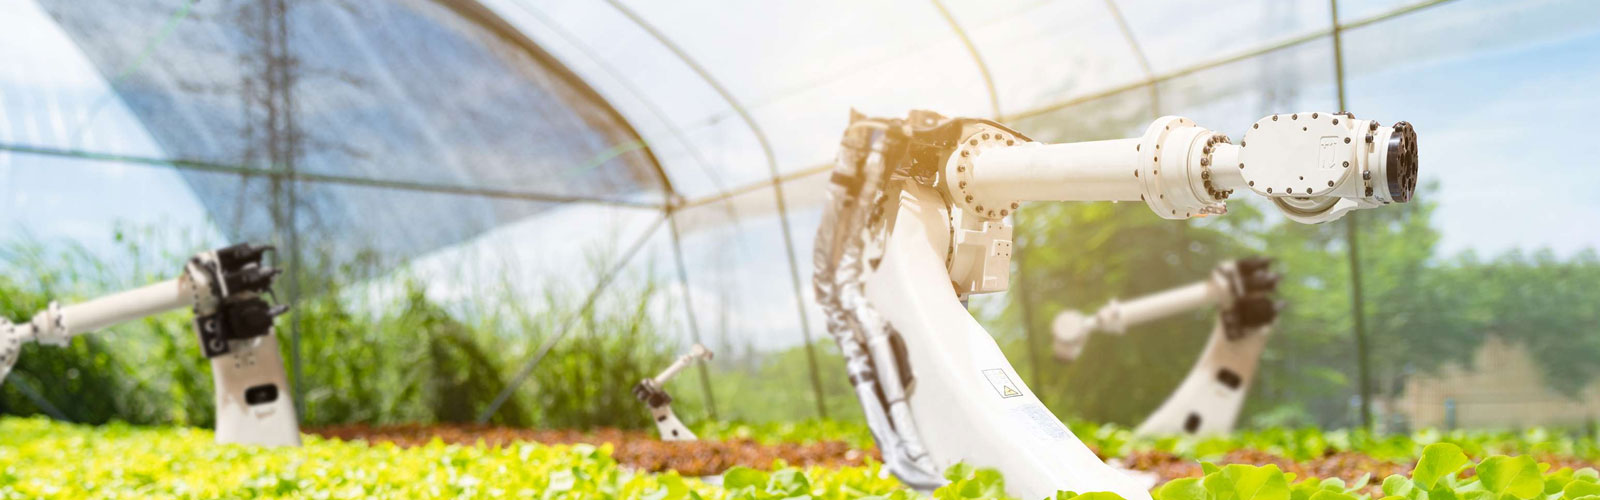 robot in greenhouse